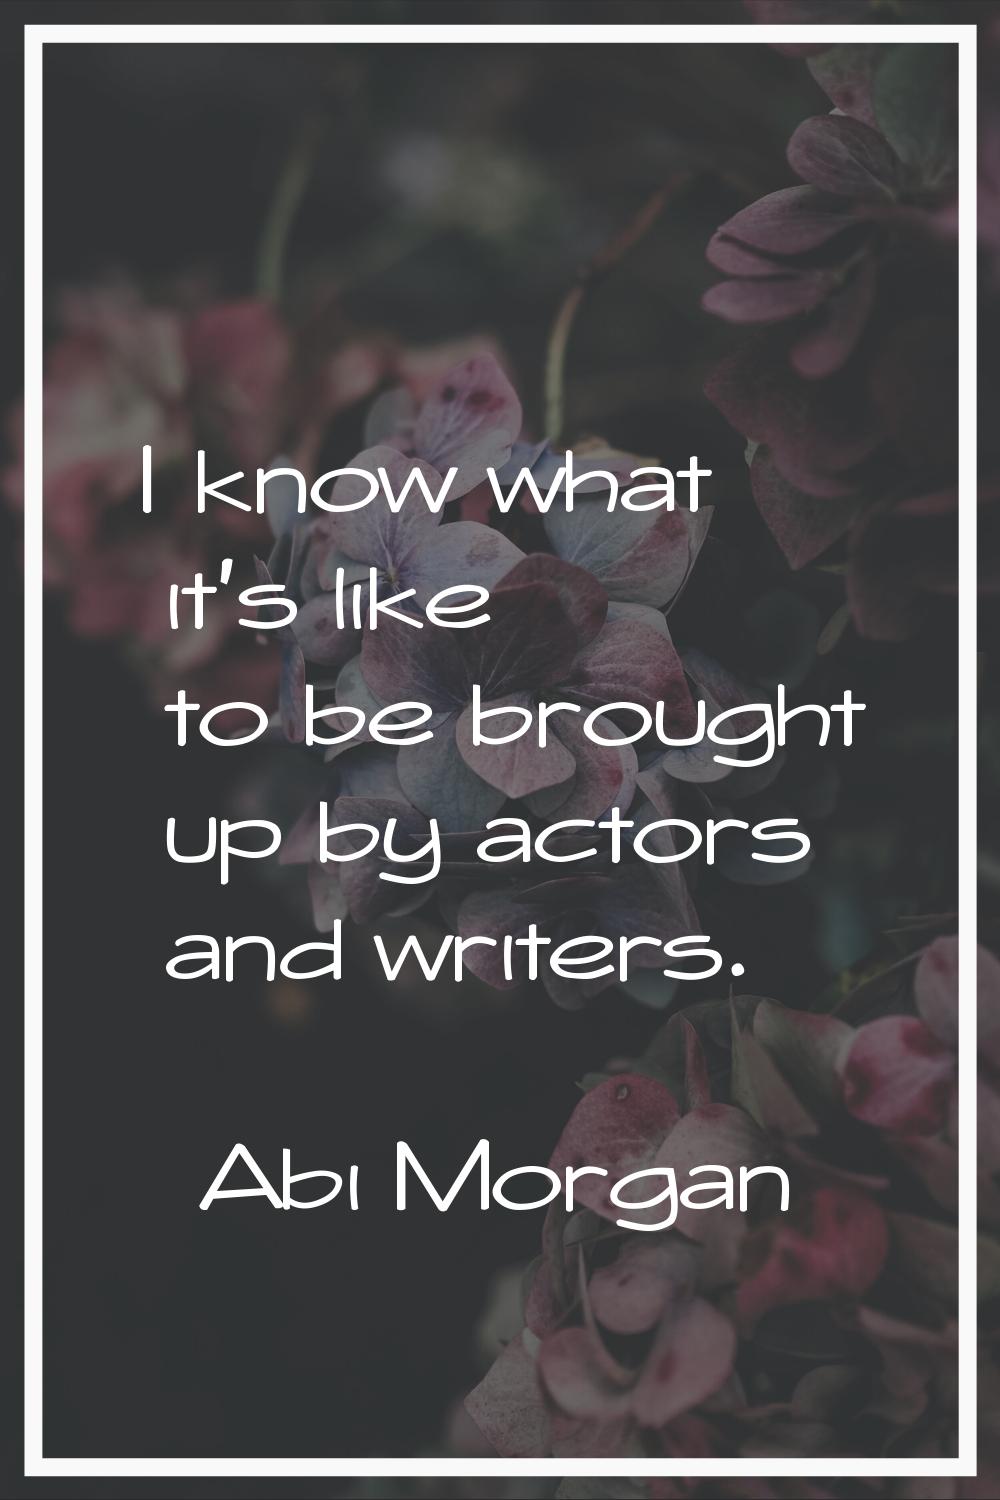 I know what it's like to be brought up by actors and writers.